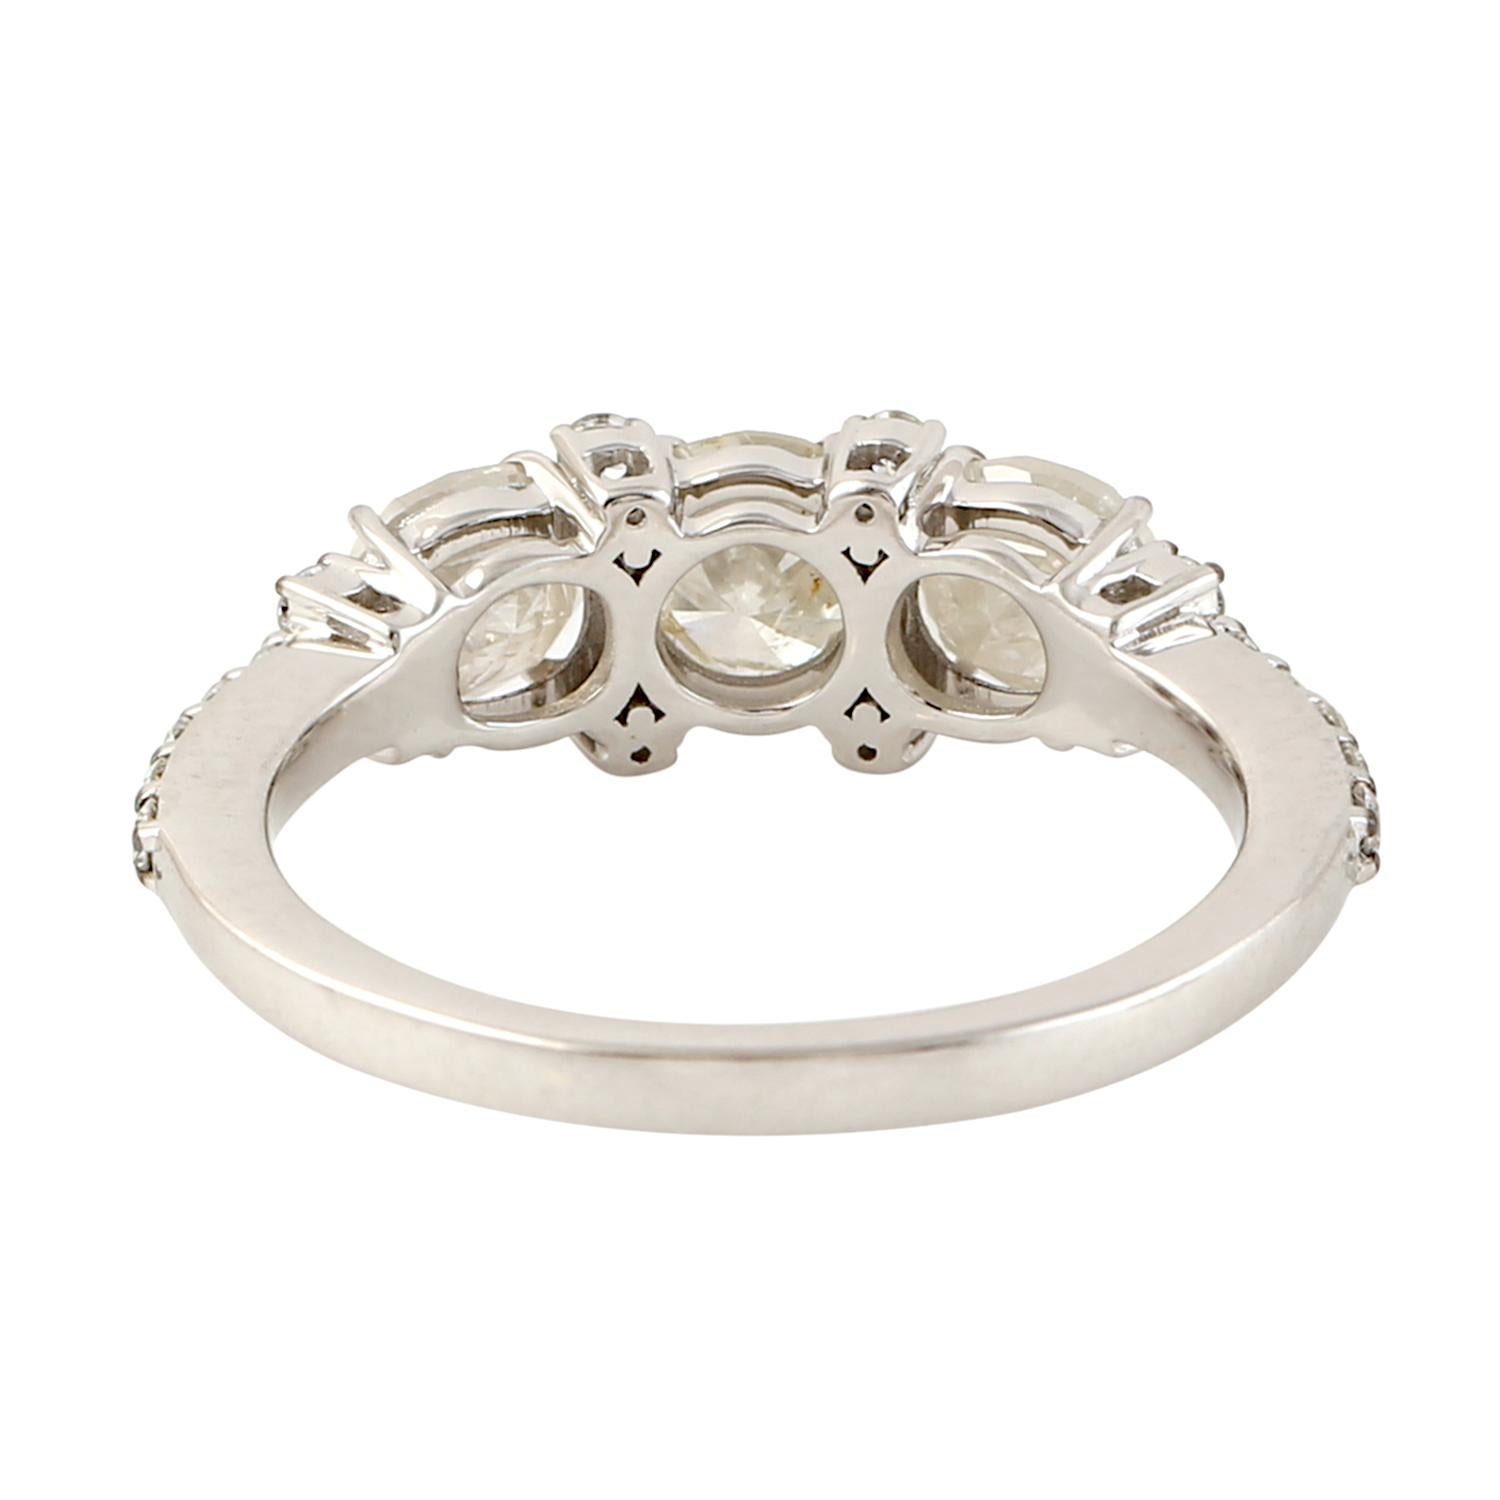 Mixed Cut Rosecut Diamonds Band Ring With Sparkling Diamonds Made In 18k White Gold For Sale